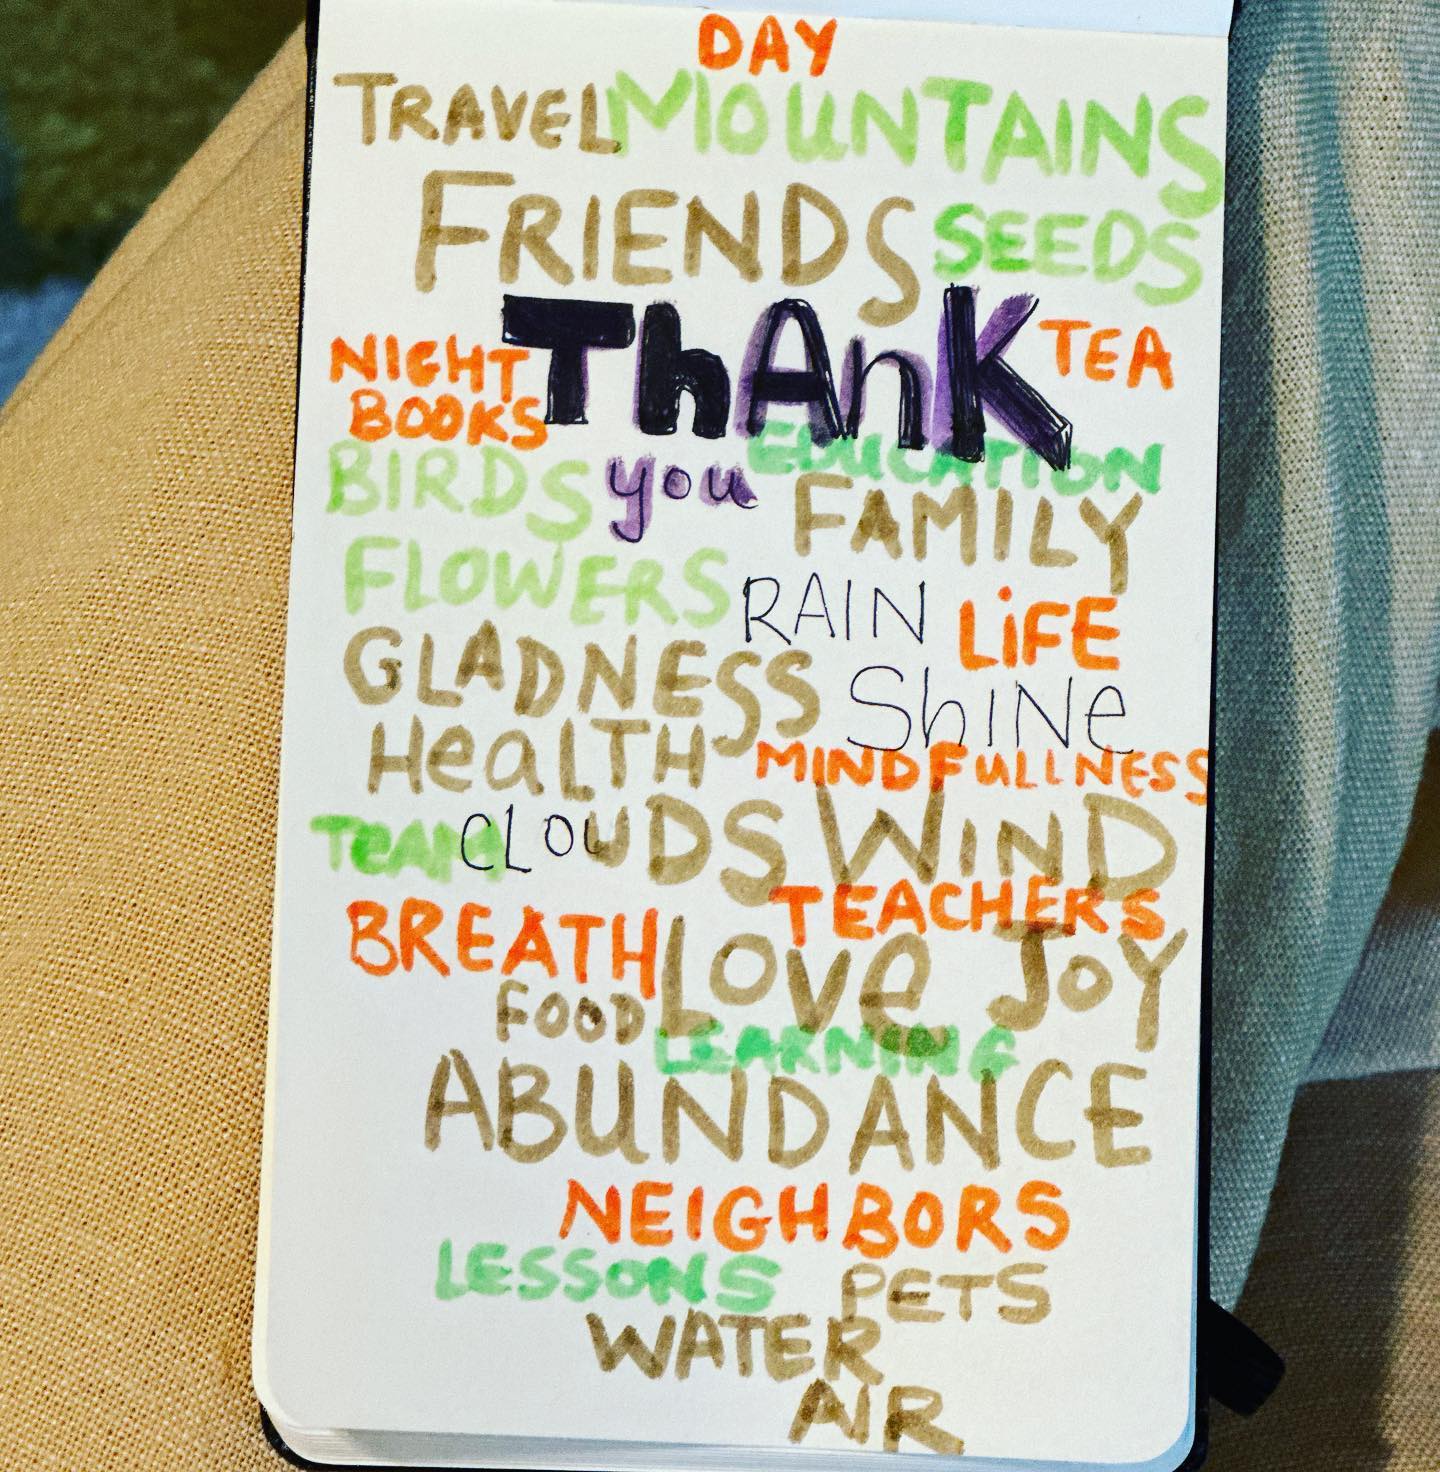 A gratitude rampage! Start your days with a grateful heart for the energy you carry through your days decide what flows into your life  

Which word caught your attention first?